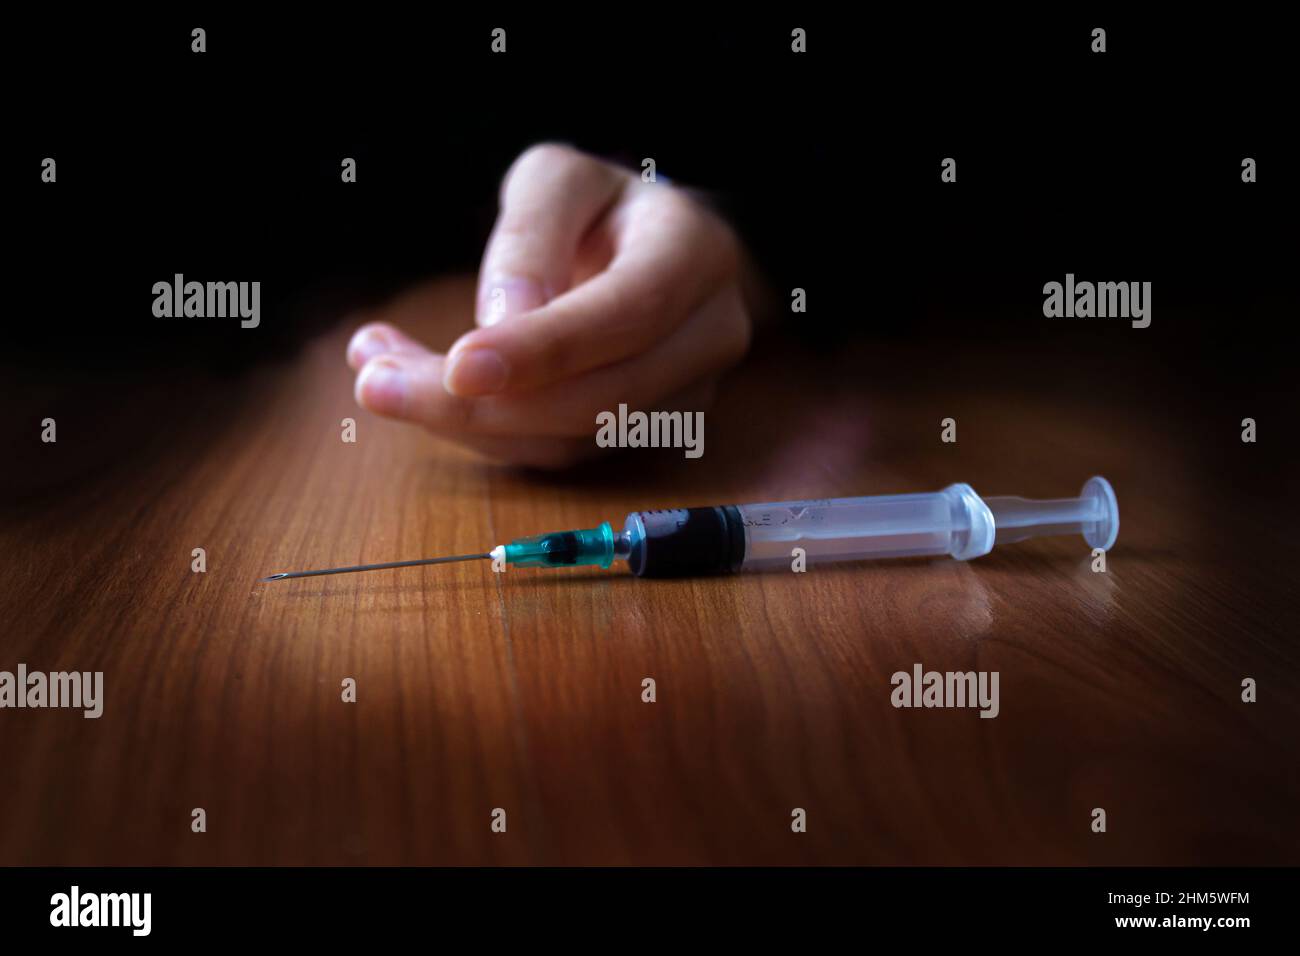 Drug addiction concept. Young woman slumped on the floor trying to reach for a drug syringe. Stock Photo